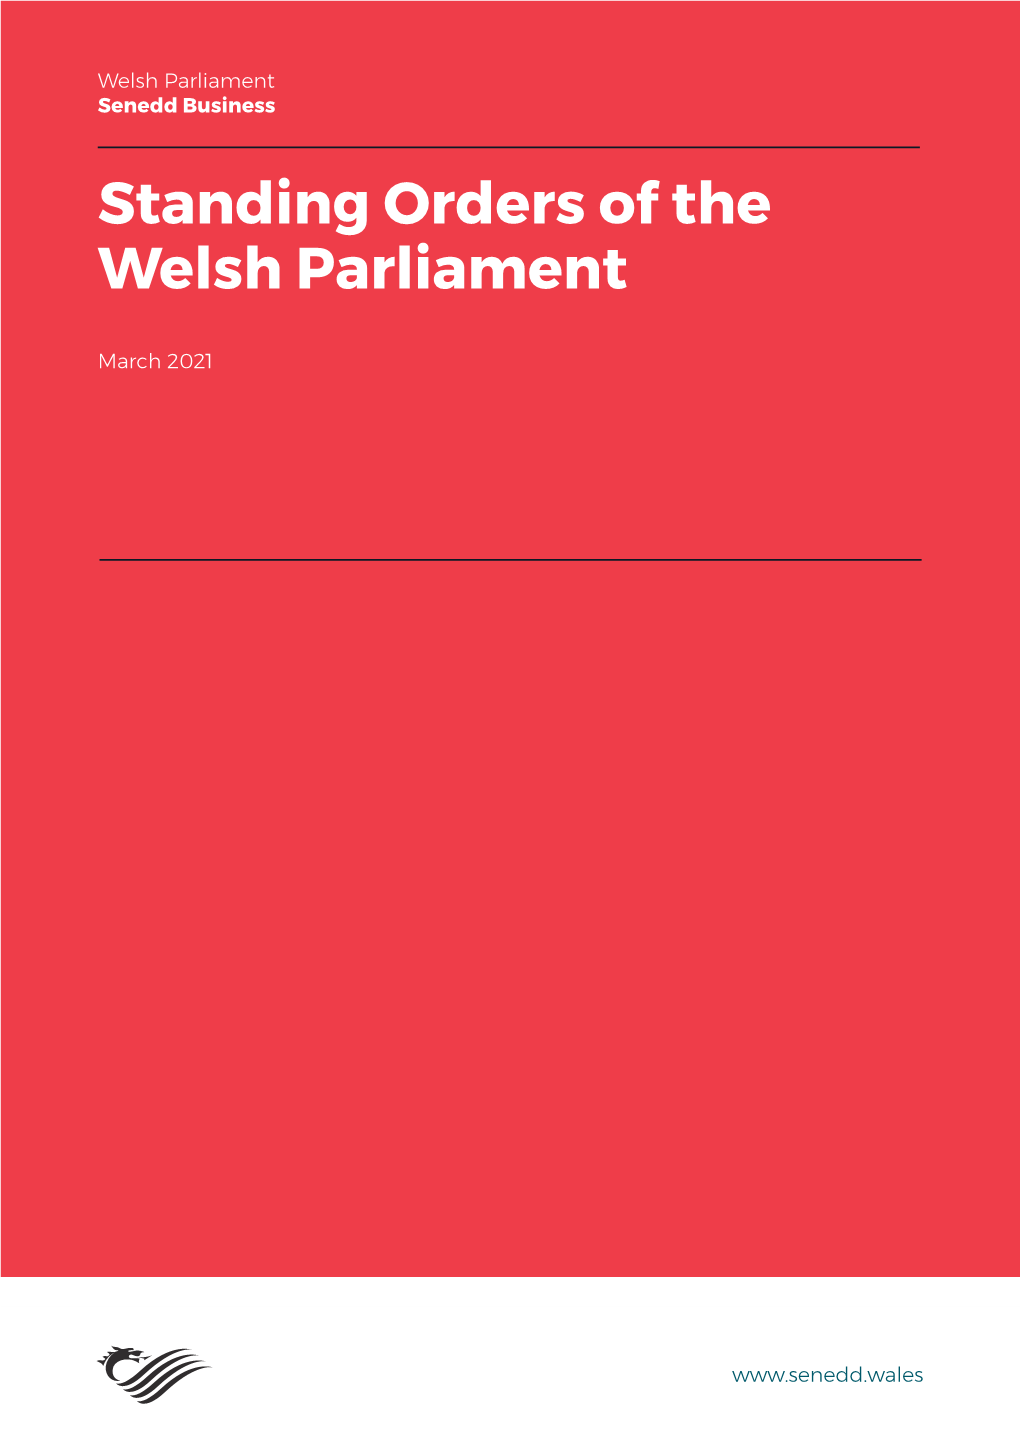 Standing Orders of the Welsh Parliament